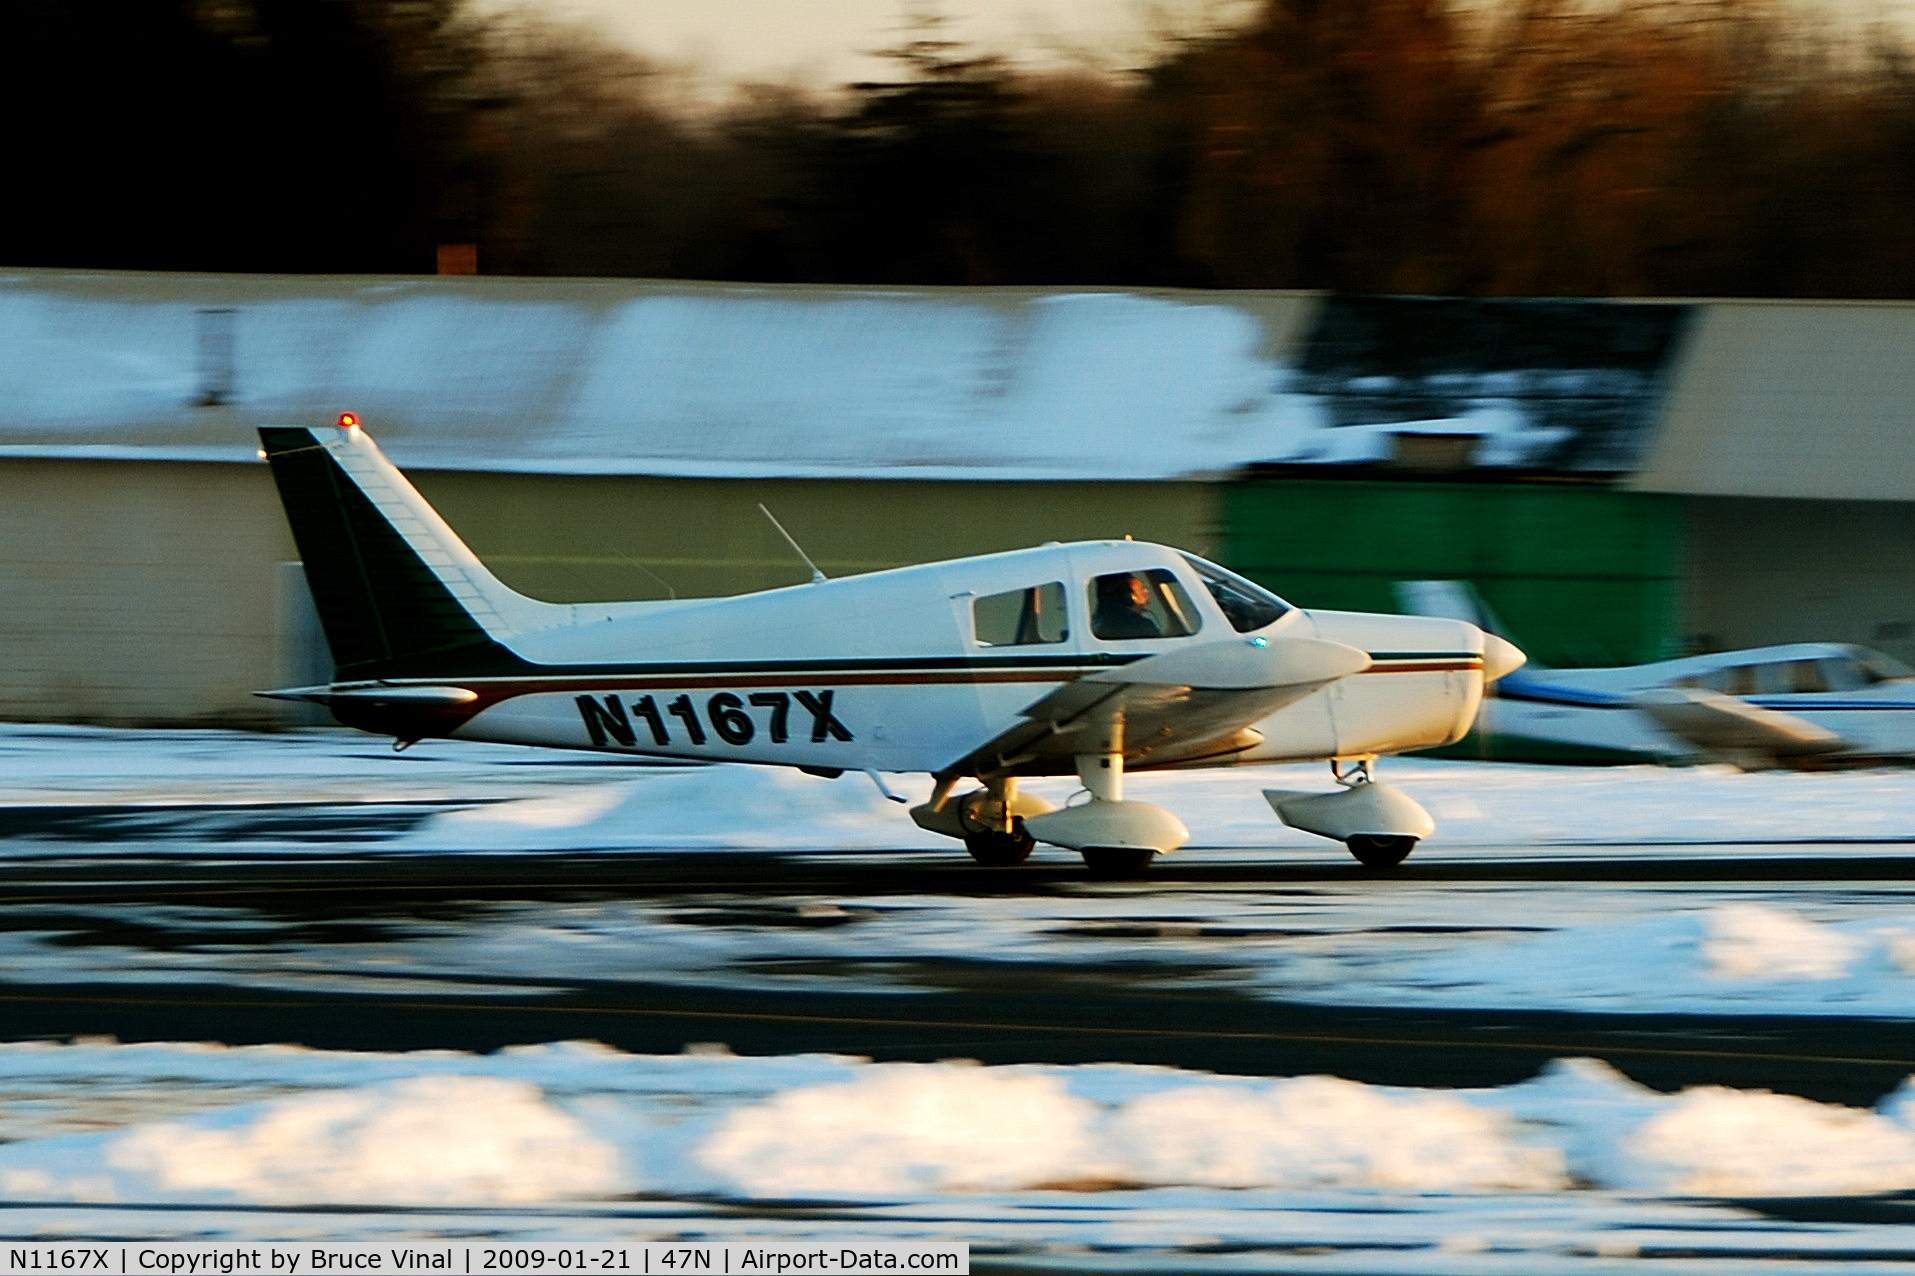 N1167X, 1975 Piper PA-28-140 C/N 28-7525295, A sunset landing at Central Jersey